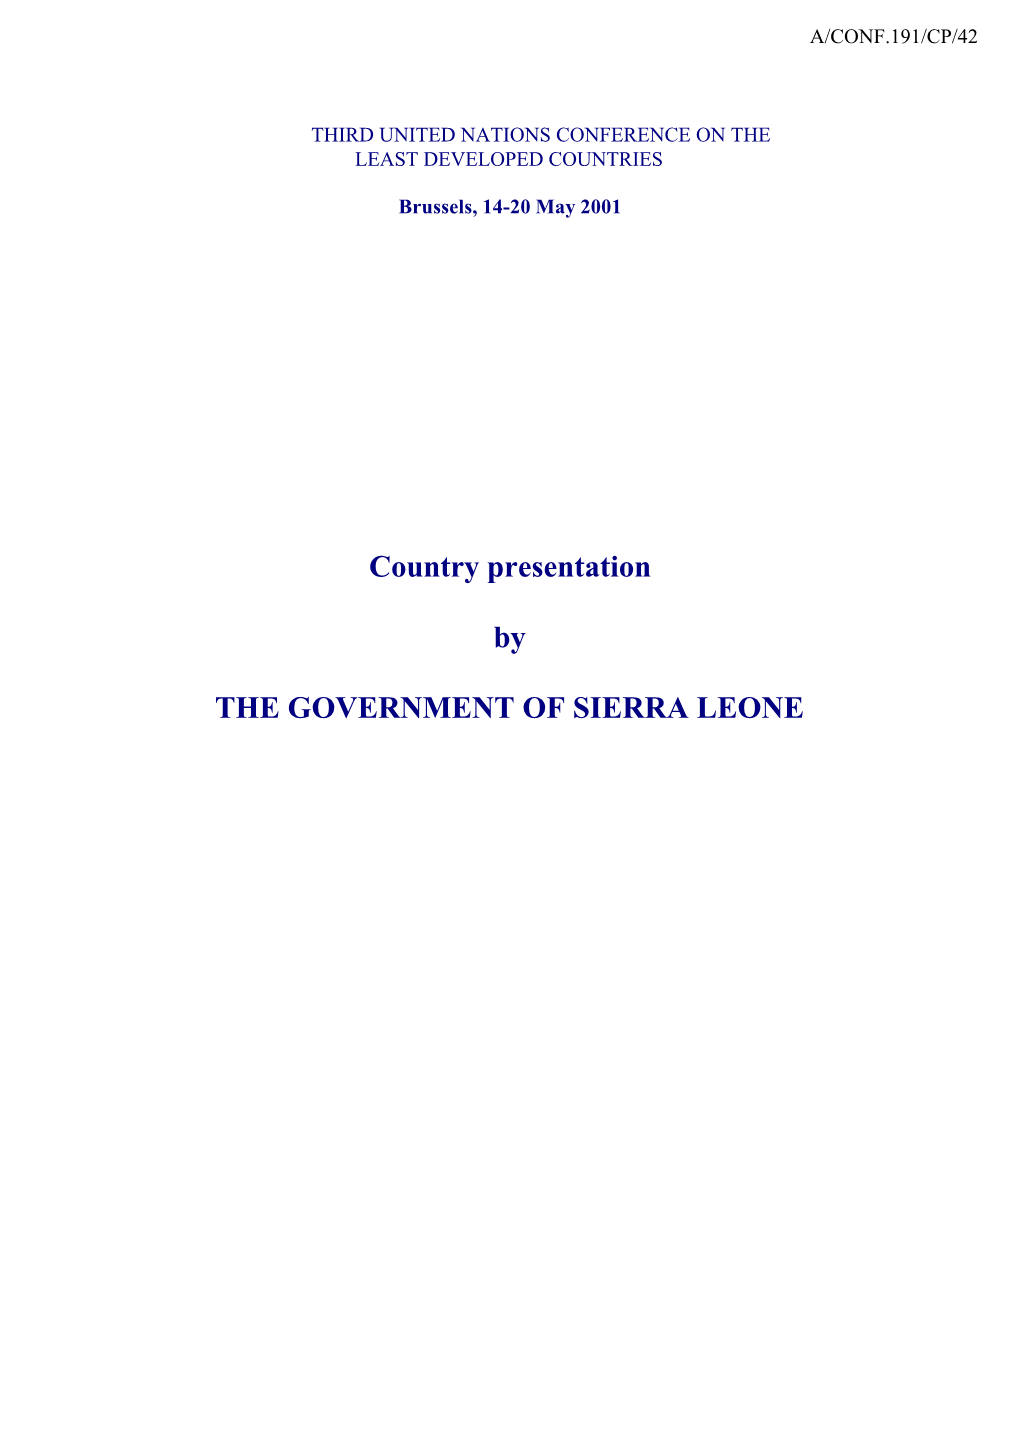 Country Presentation by the GOVERNMENT of SIERRA LEONE